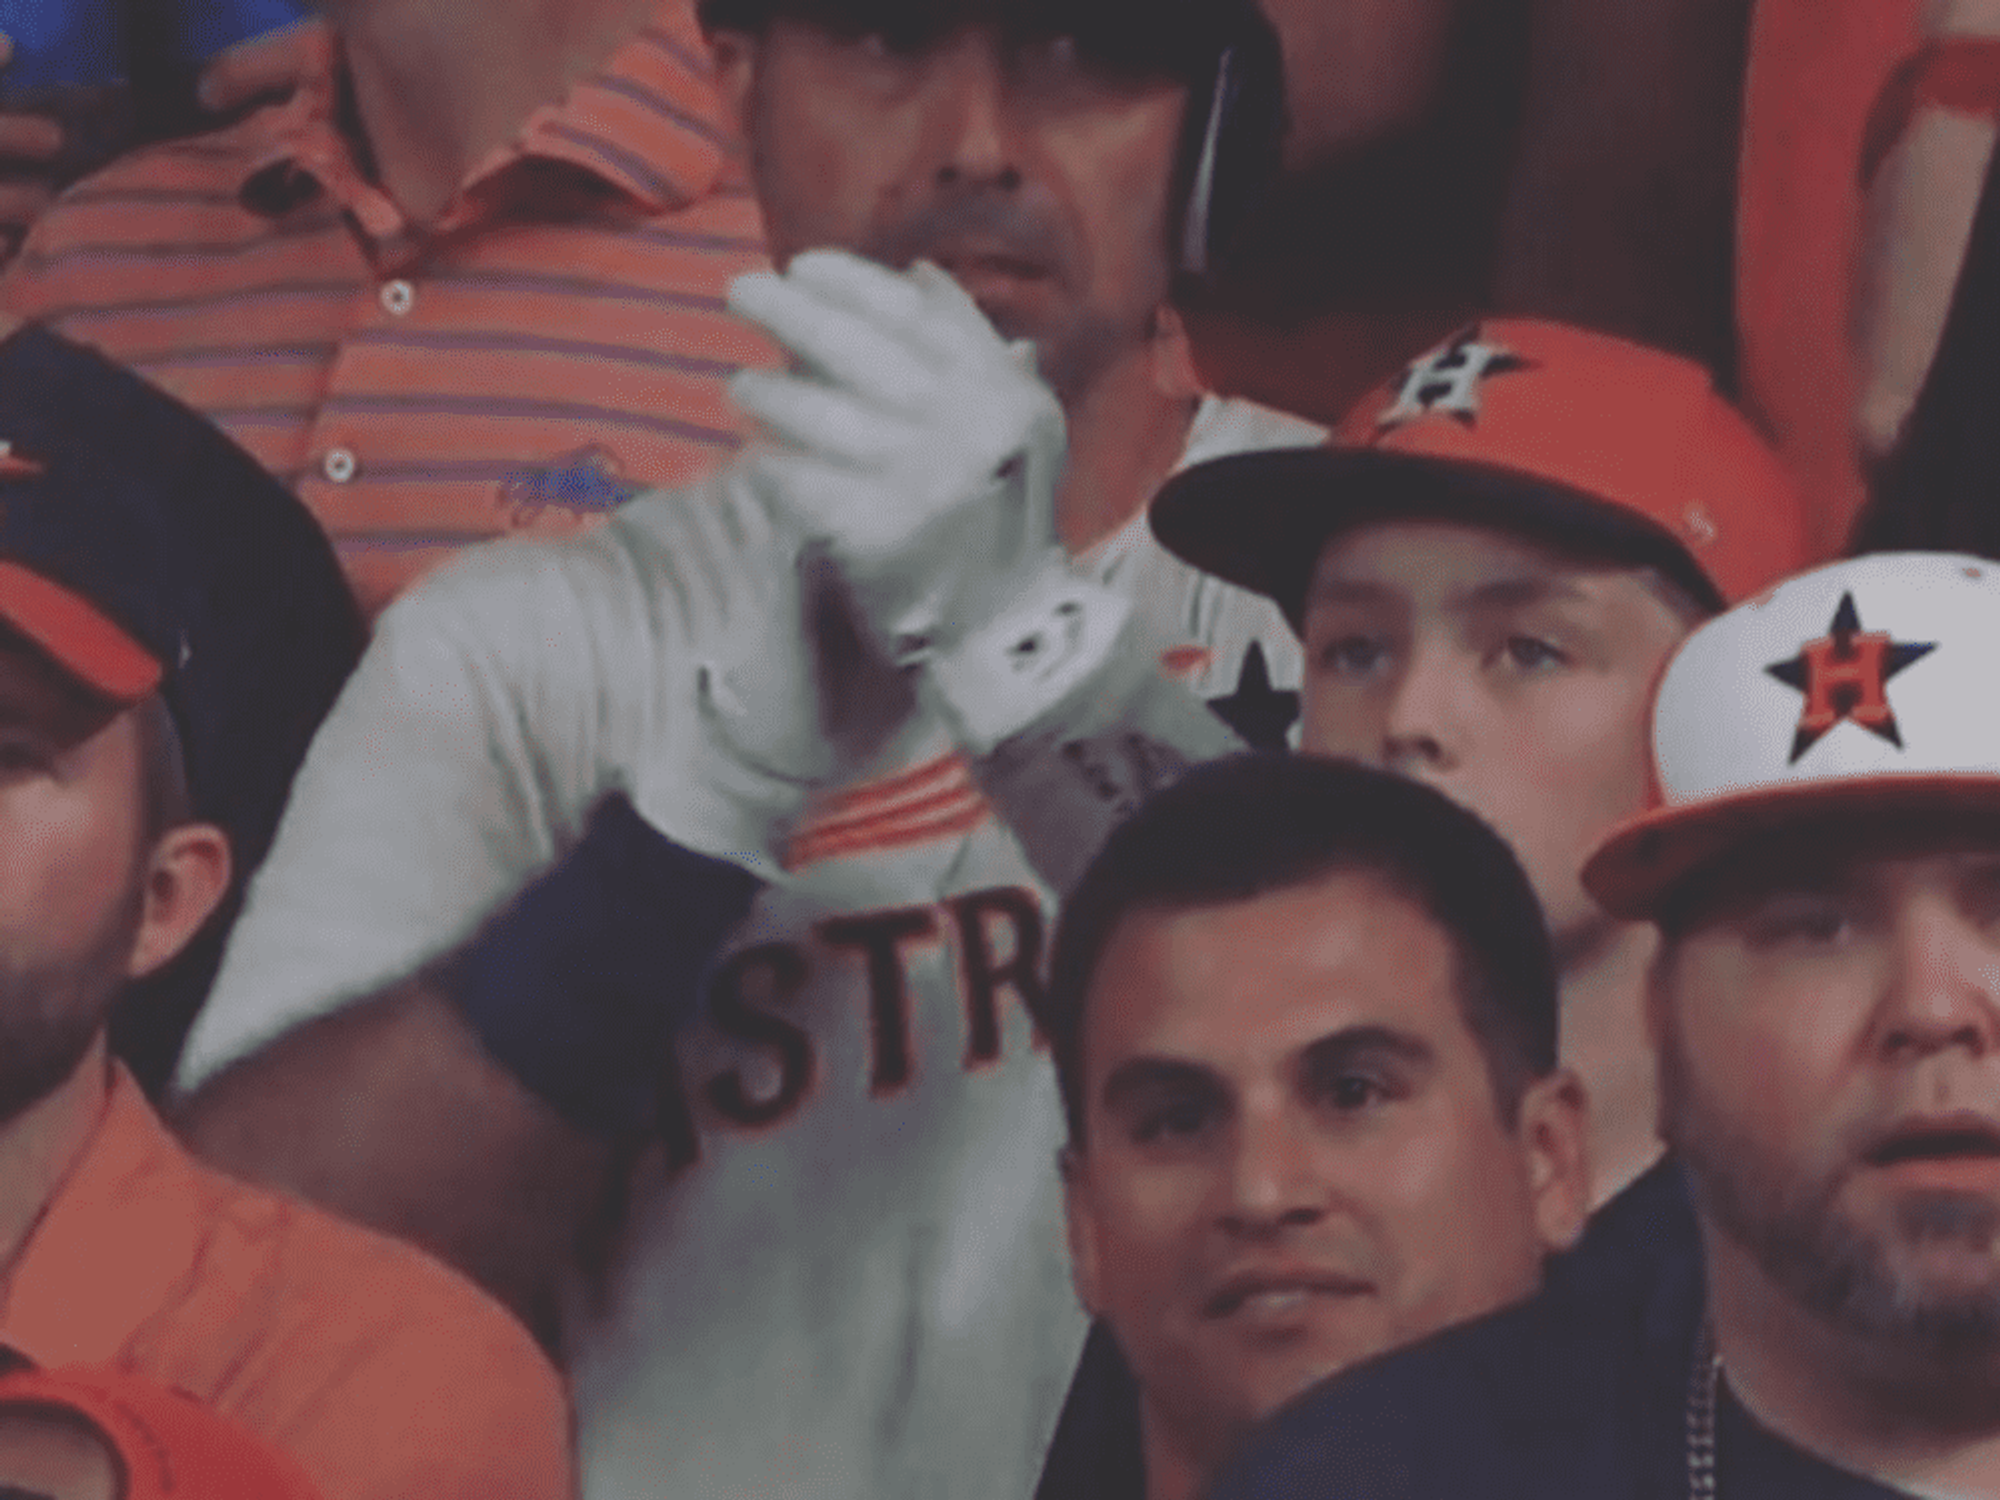 Astros 'mystery fan' who became an internet sensation is found; he